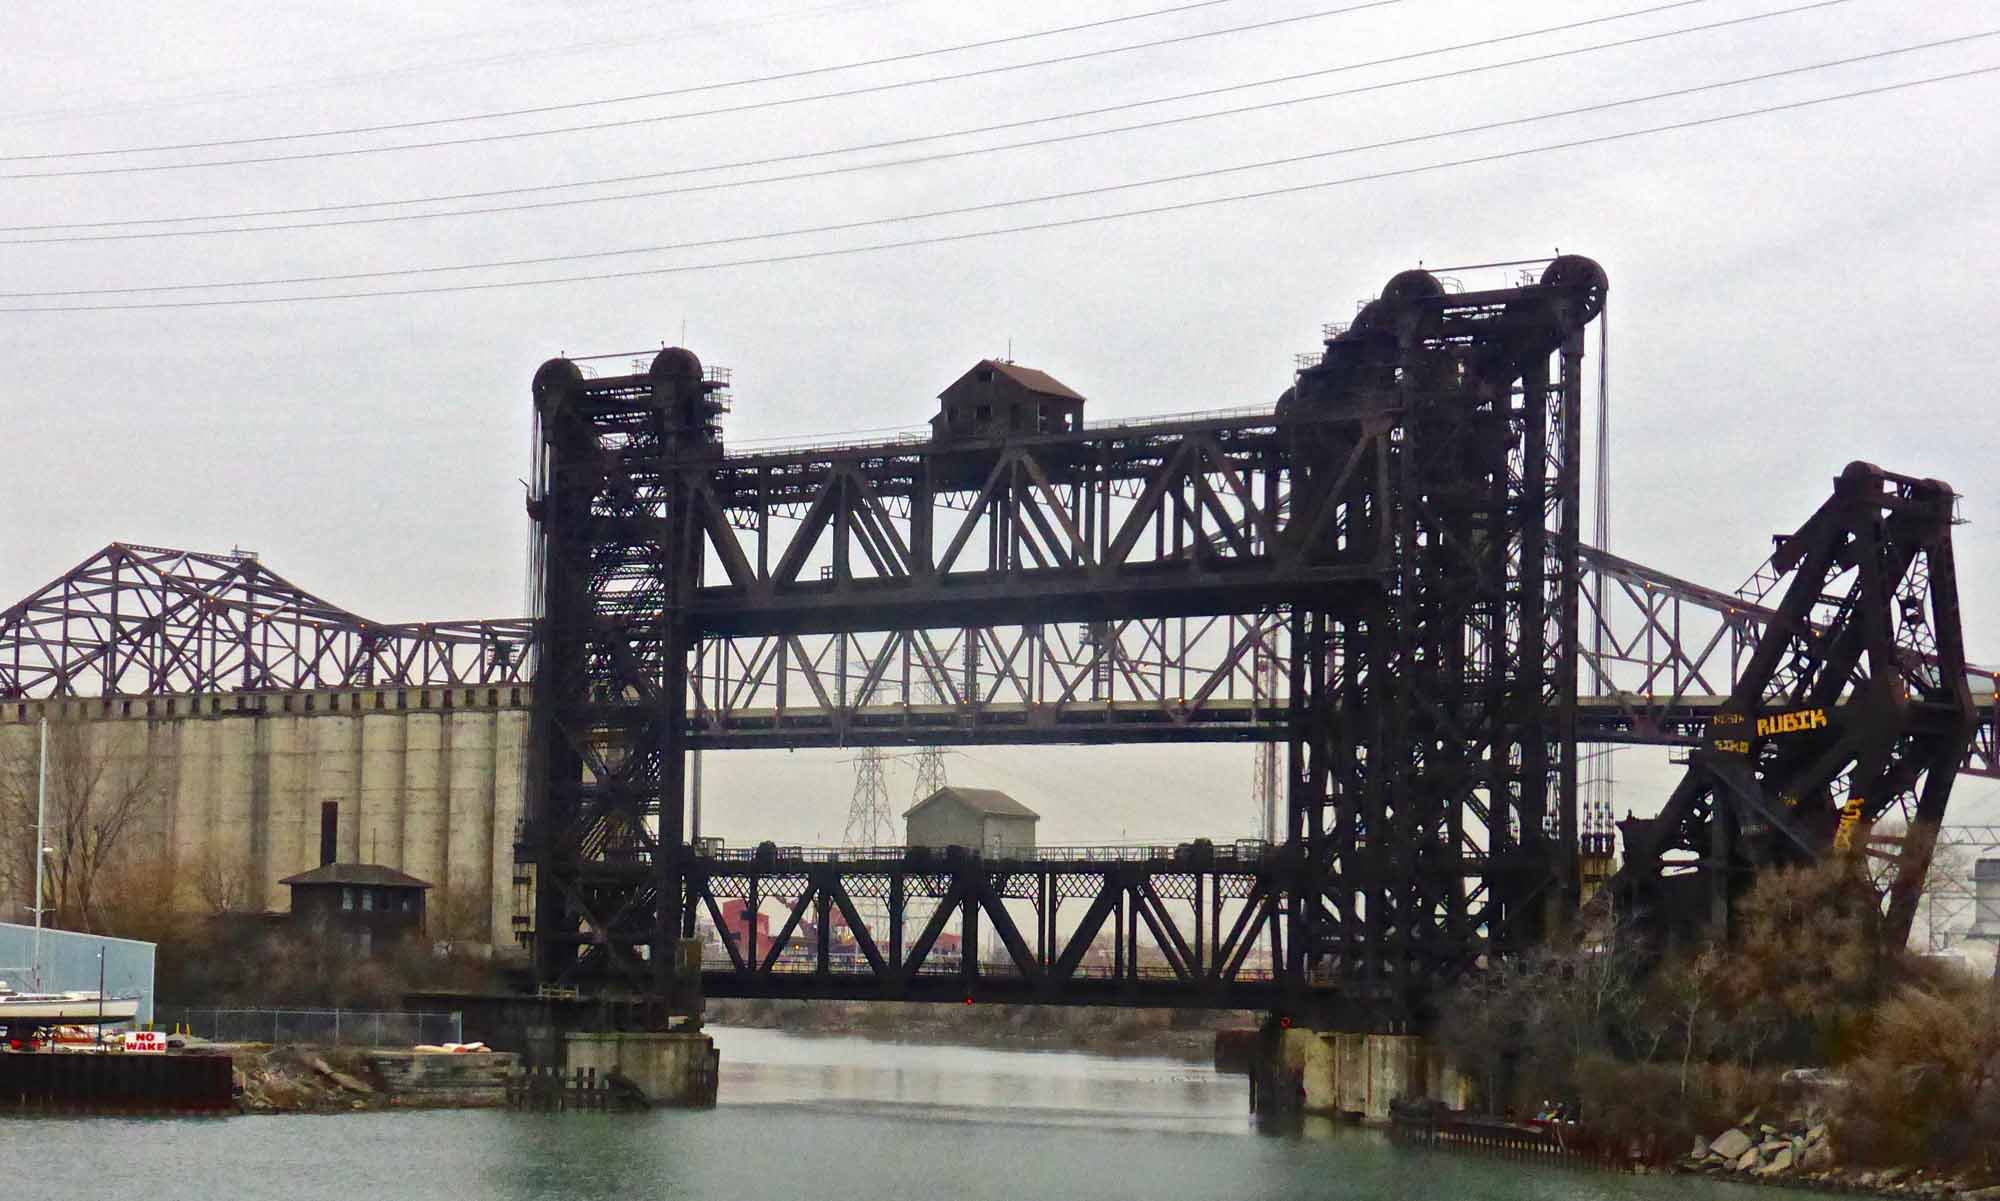 Railroad bridges over the Calumet River, with the Chicago Skyway in the background.